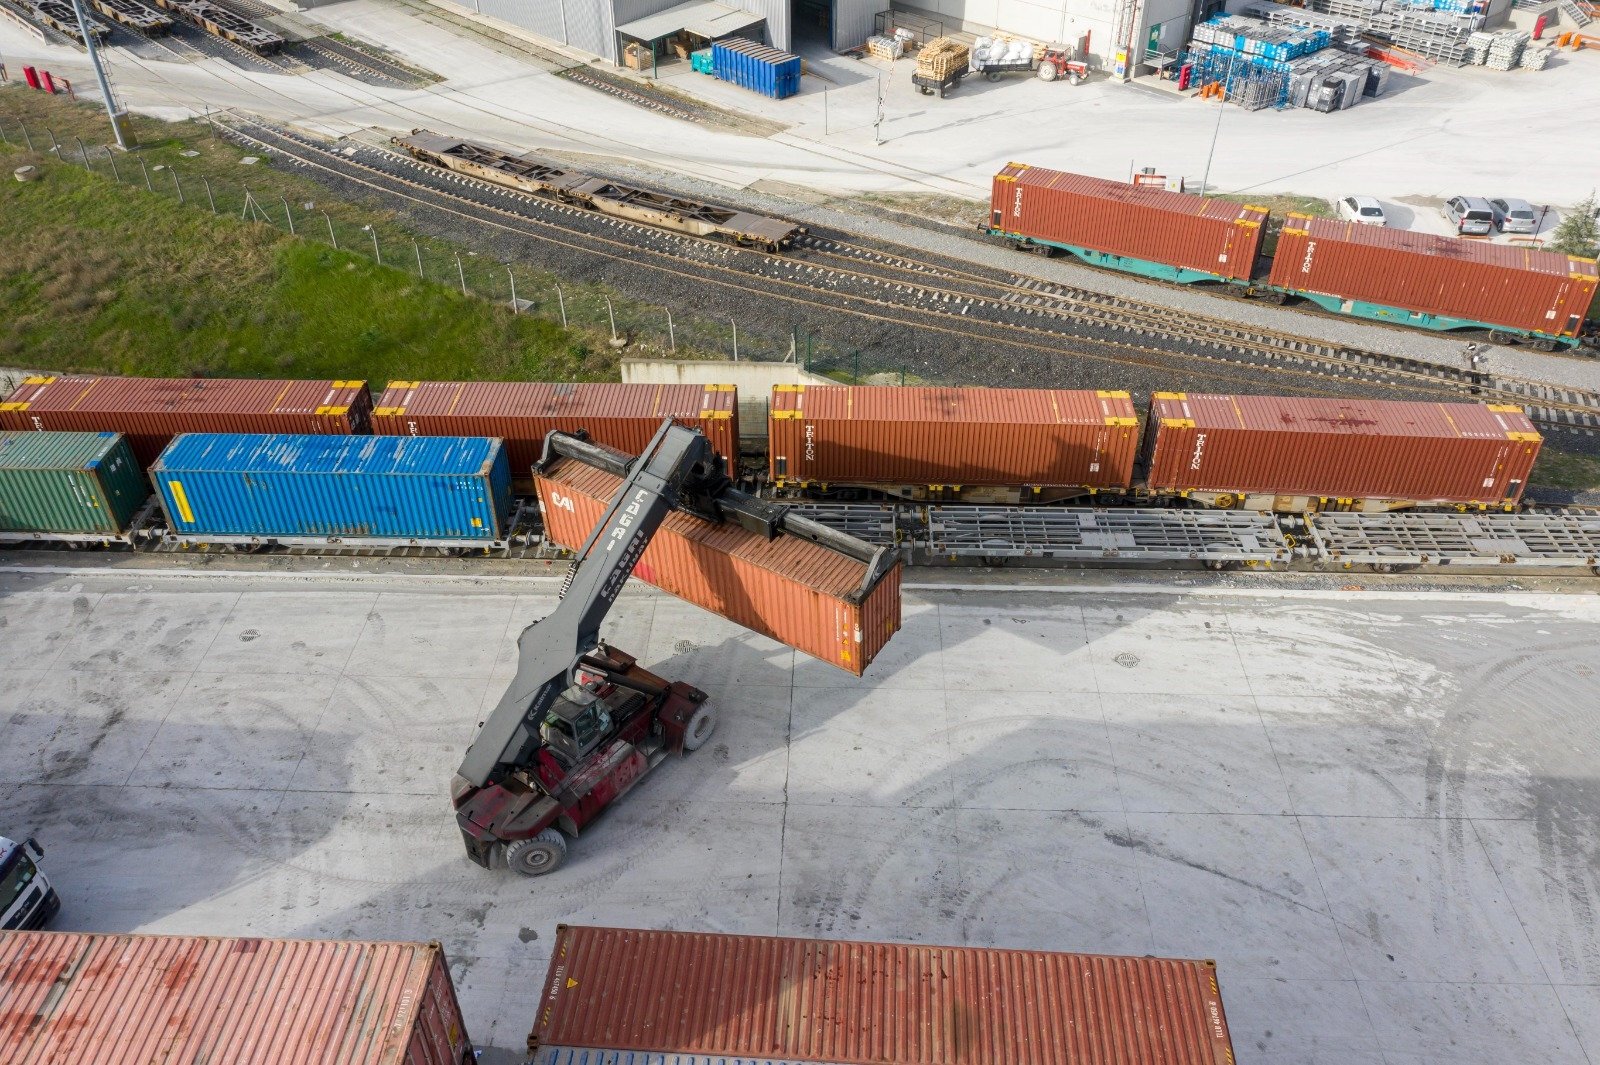 Containers seen at the Çerkezköy railway station in Tekirdağ, northwestern Turkey, Dec. 21, 2020. (Courtesy of Transportation and Infrastructure Ministry)